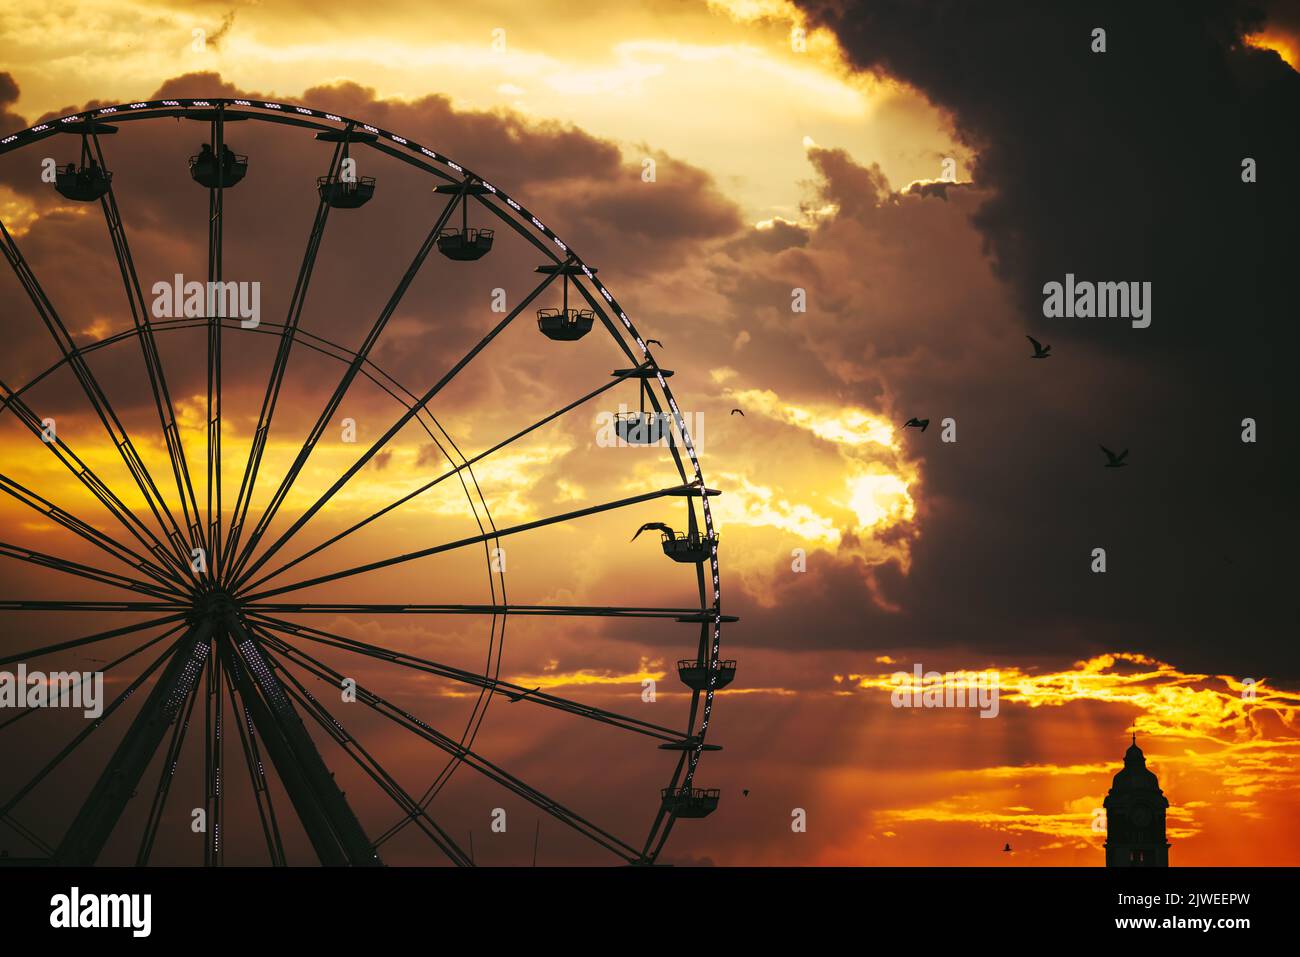 Ferris Wheel in amusement park and scenic sunset clouds in sky and flying birds silhouettes Stock Photo